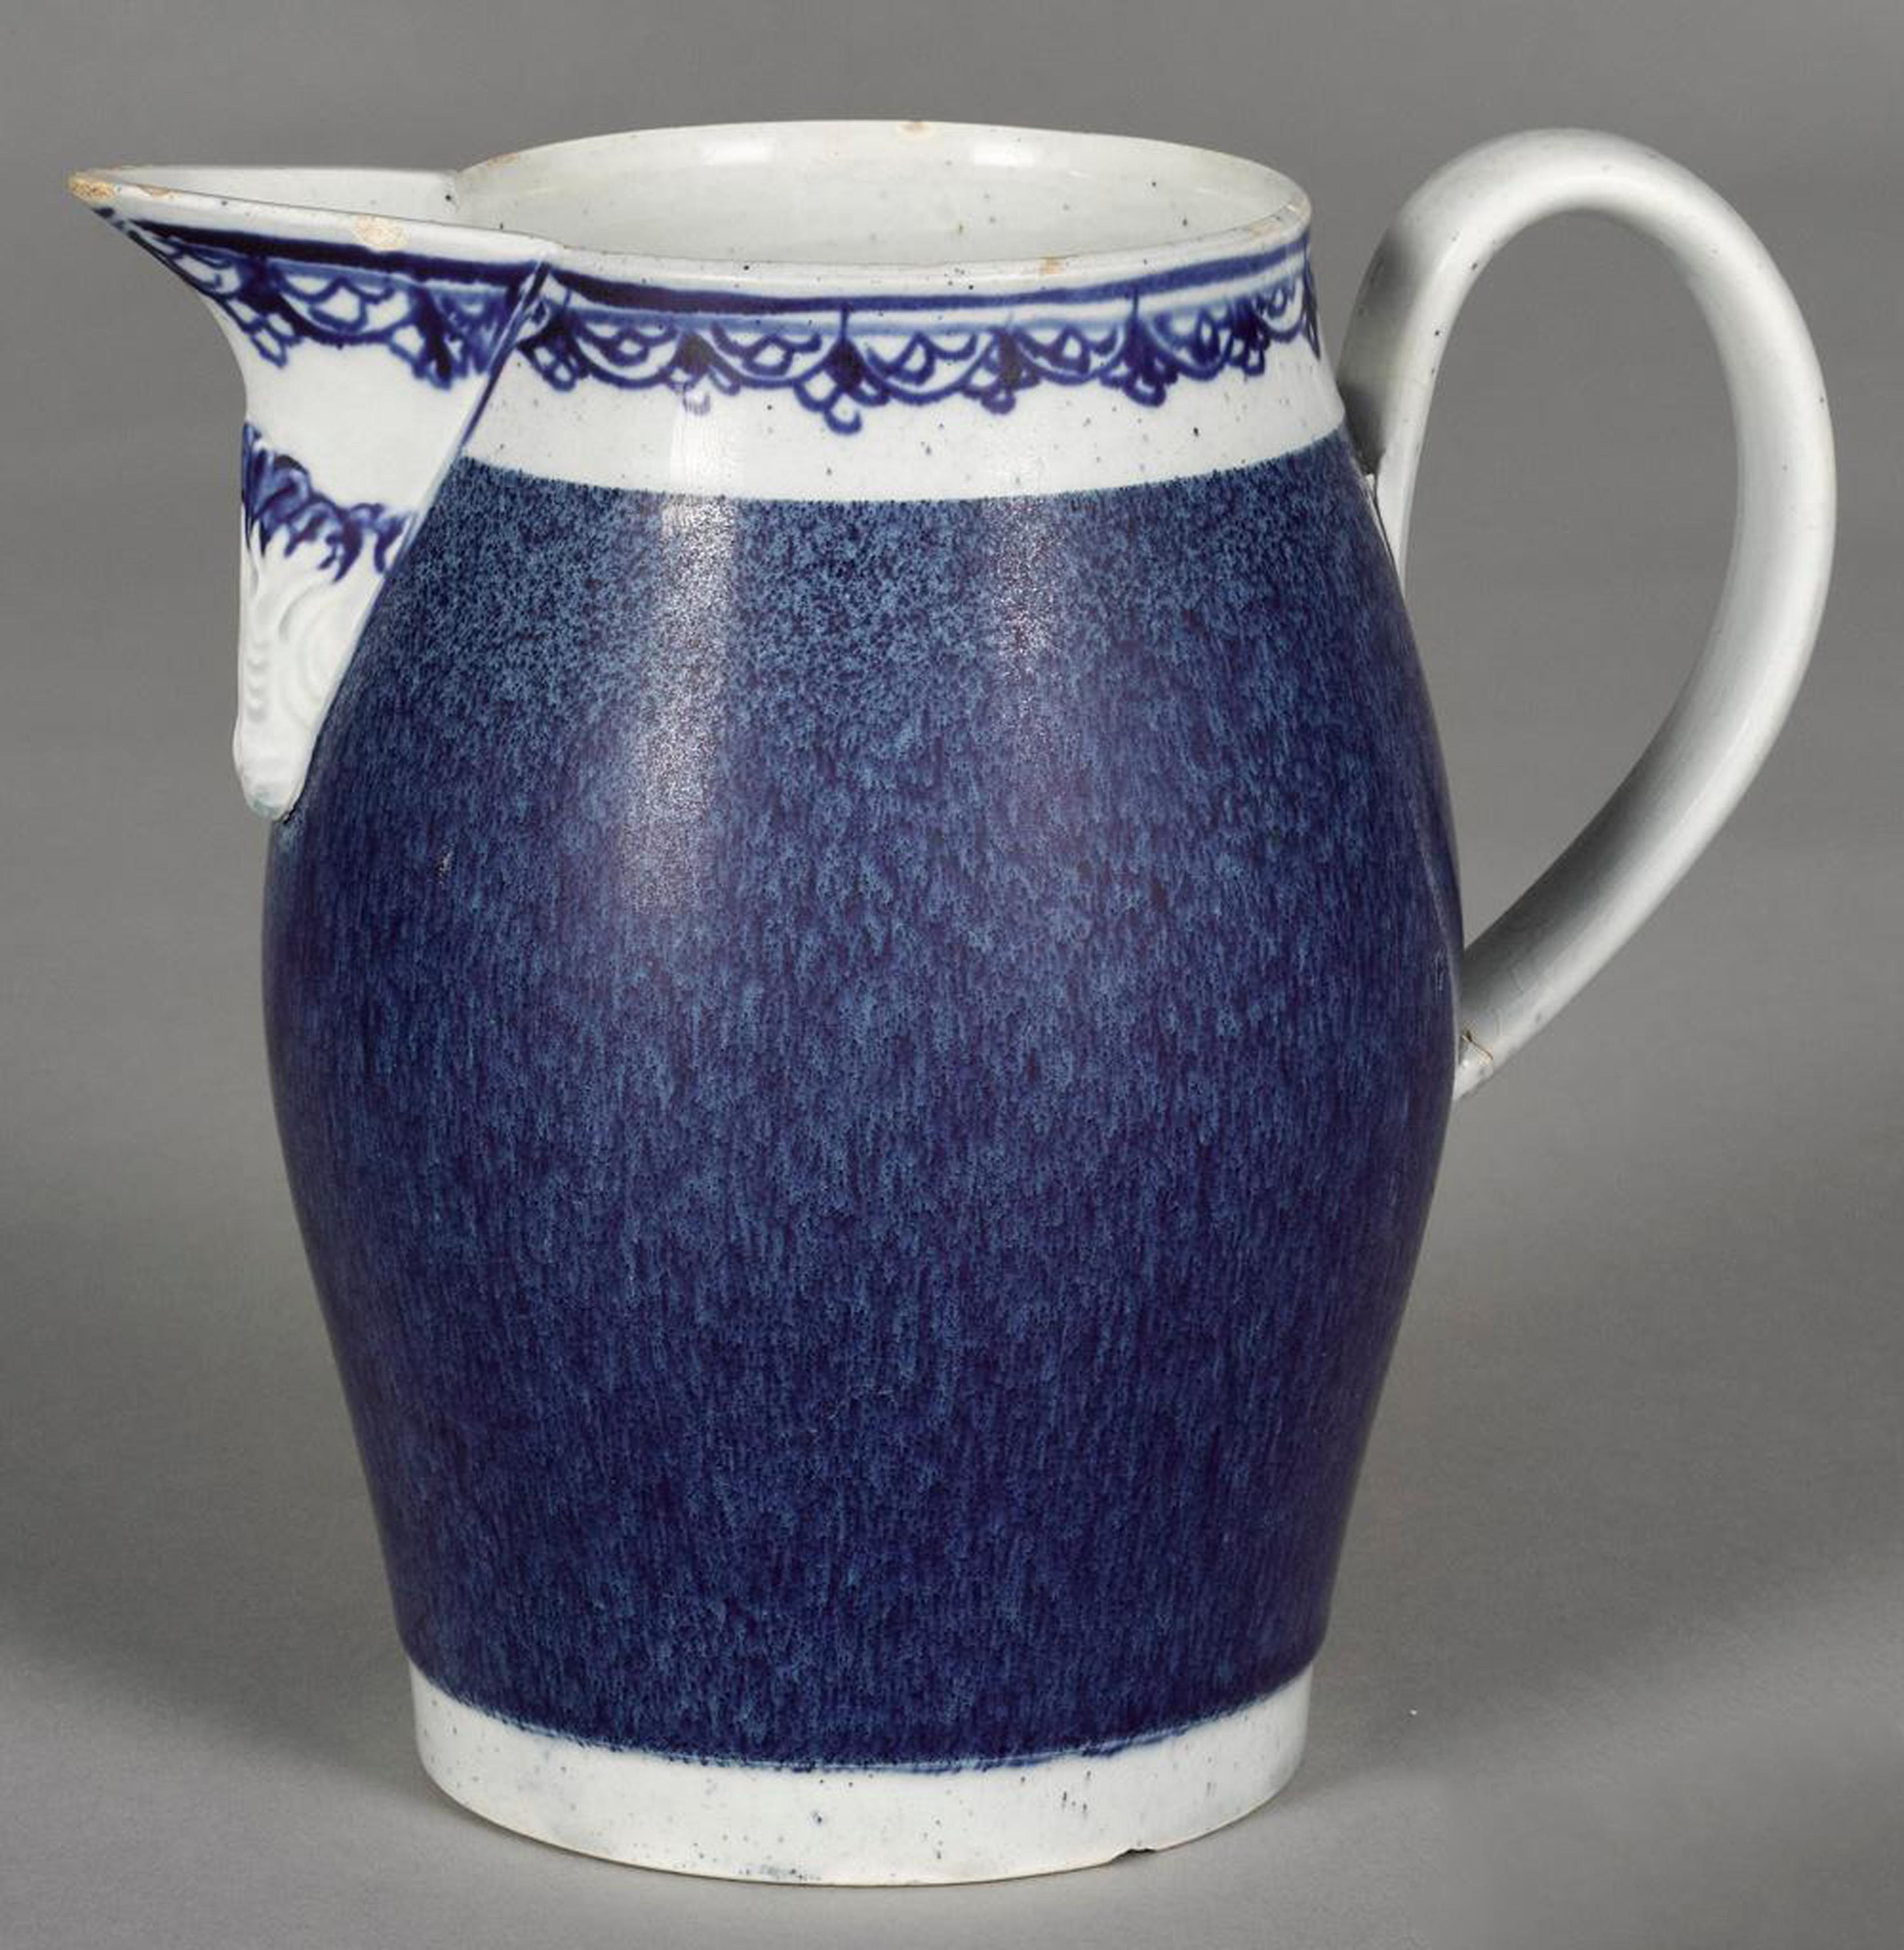 English pearlware pottery jug with speckled blue glaze,
Circa 1780-1800

The pearlware jug with a wonderful speckled blue ground.

Dimensions: 6 inches high x 6 1/2 inches wide x 4 inches deep.
 